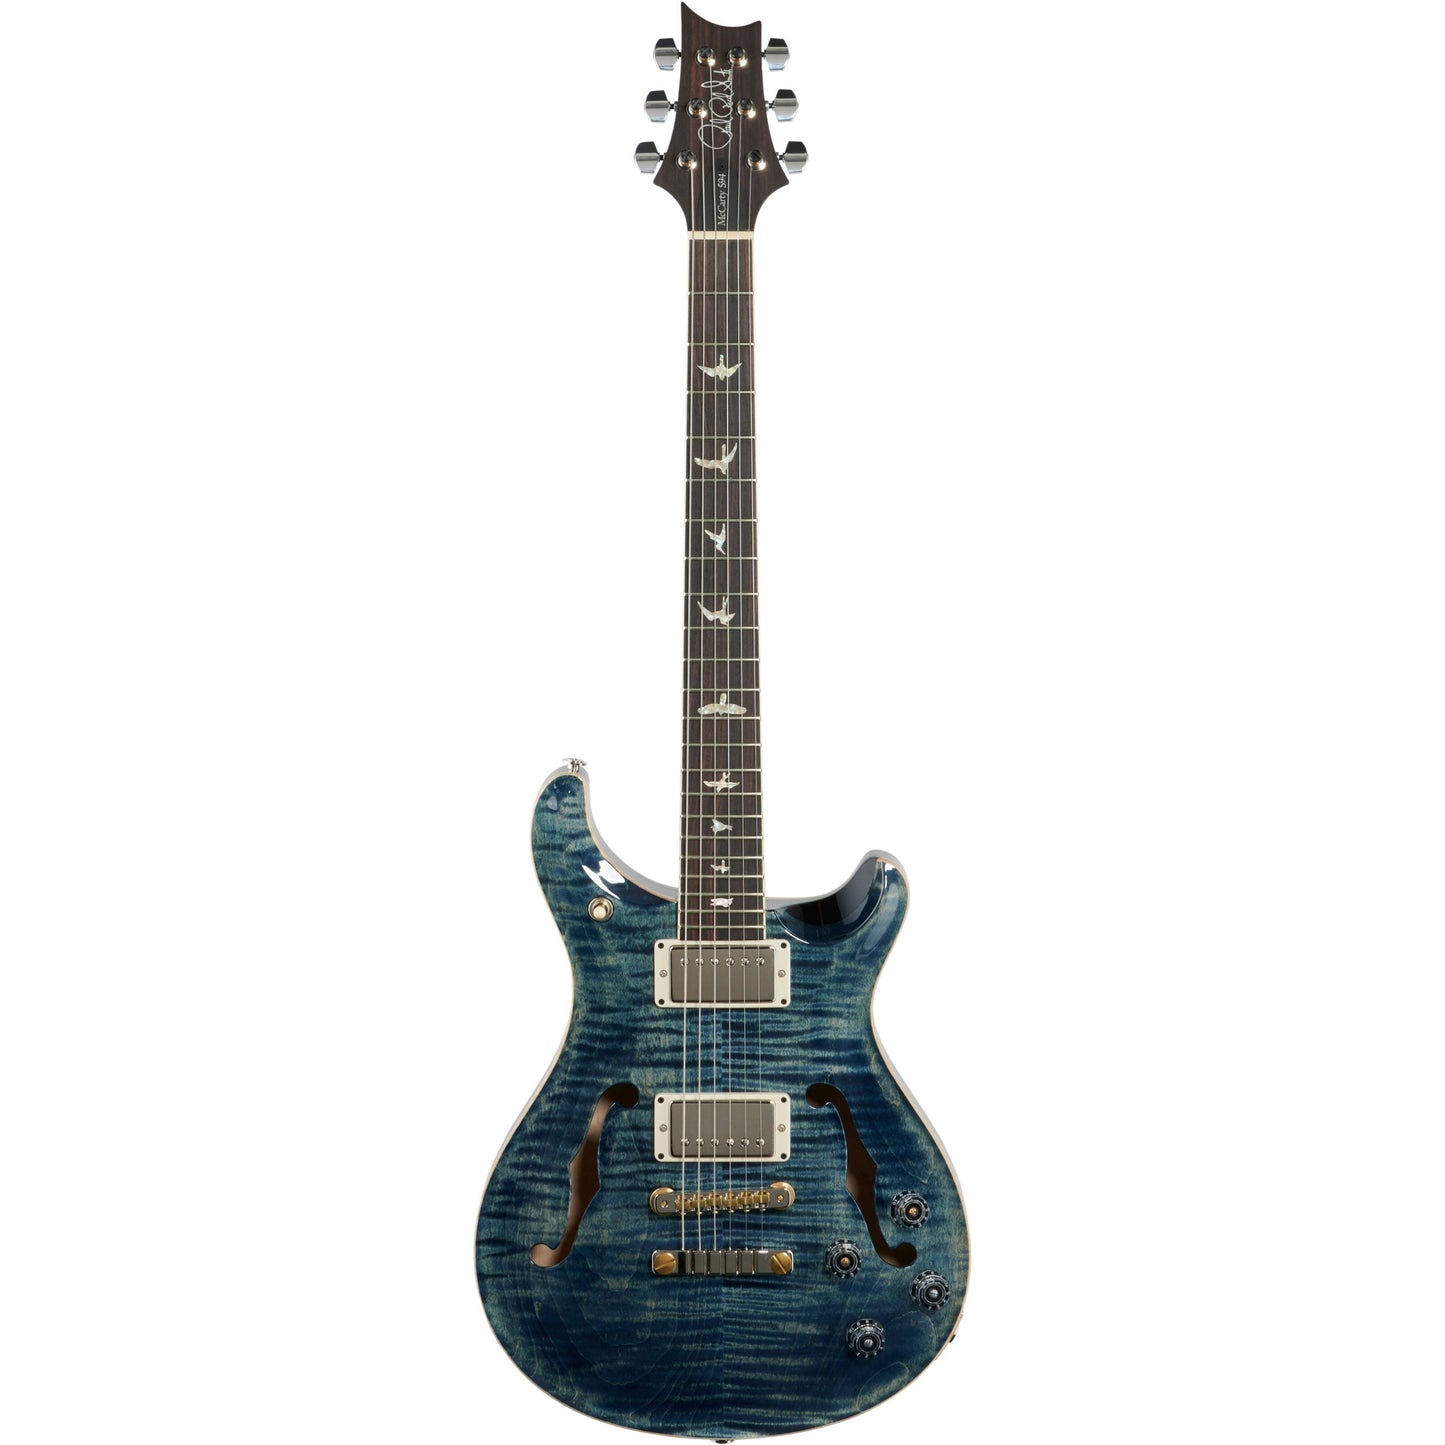 PRS Paul Reed Smith McCarty 594 Hollowbody II Electric Guitar, Faded Whale Blue